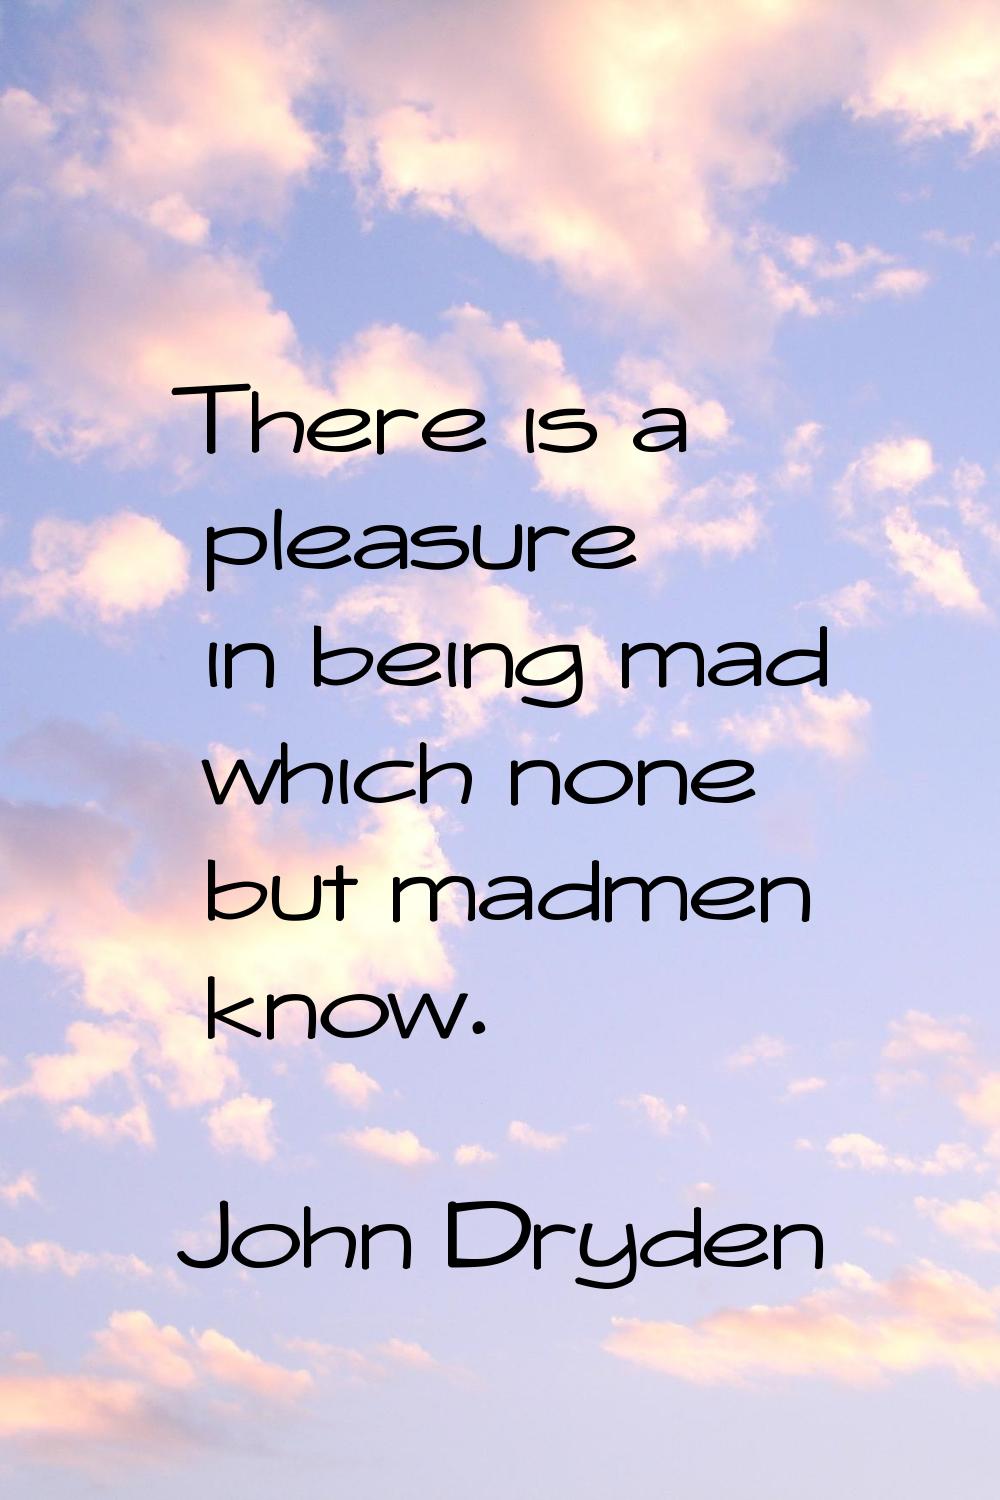 There is a pleasure in being mad which none but madmen know.